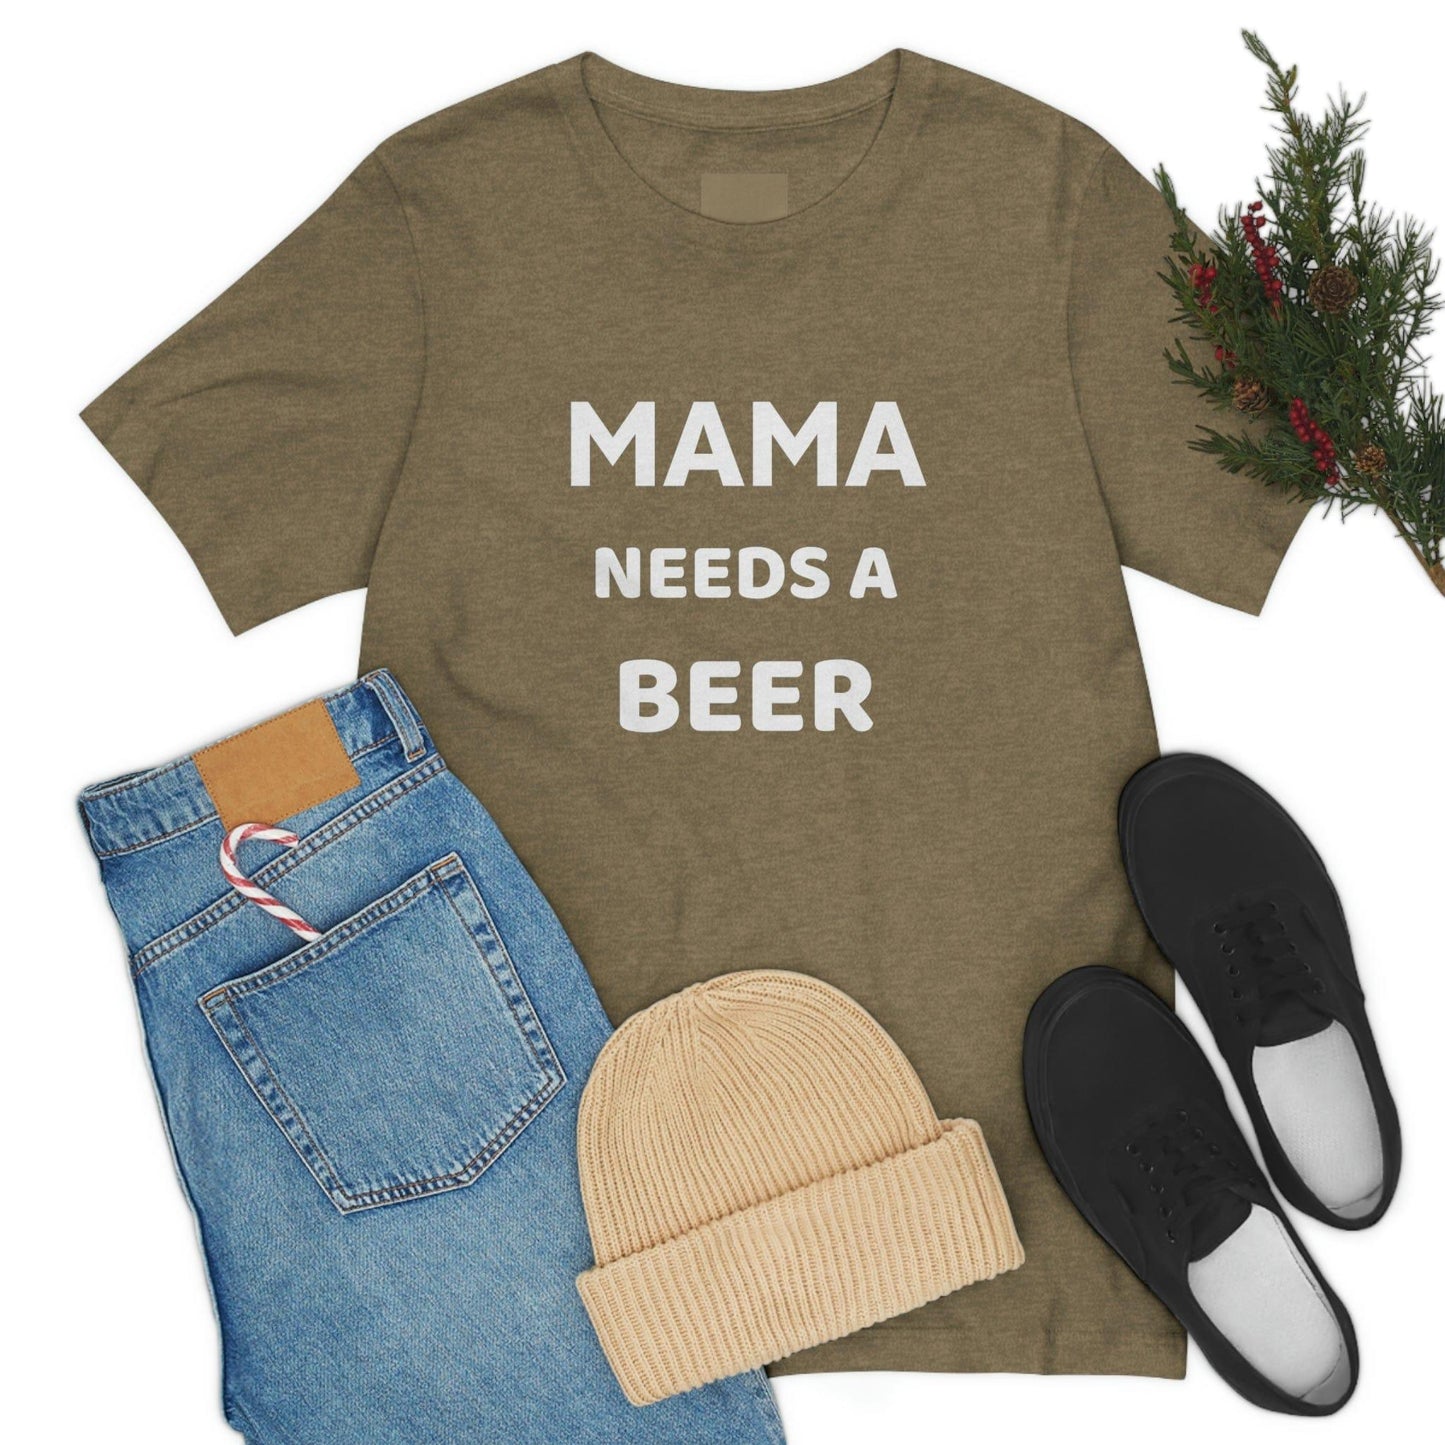 Mama needs a beer - gift for beer lover - Funny beer shirt - Funny shirt - Giftsmojo